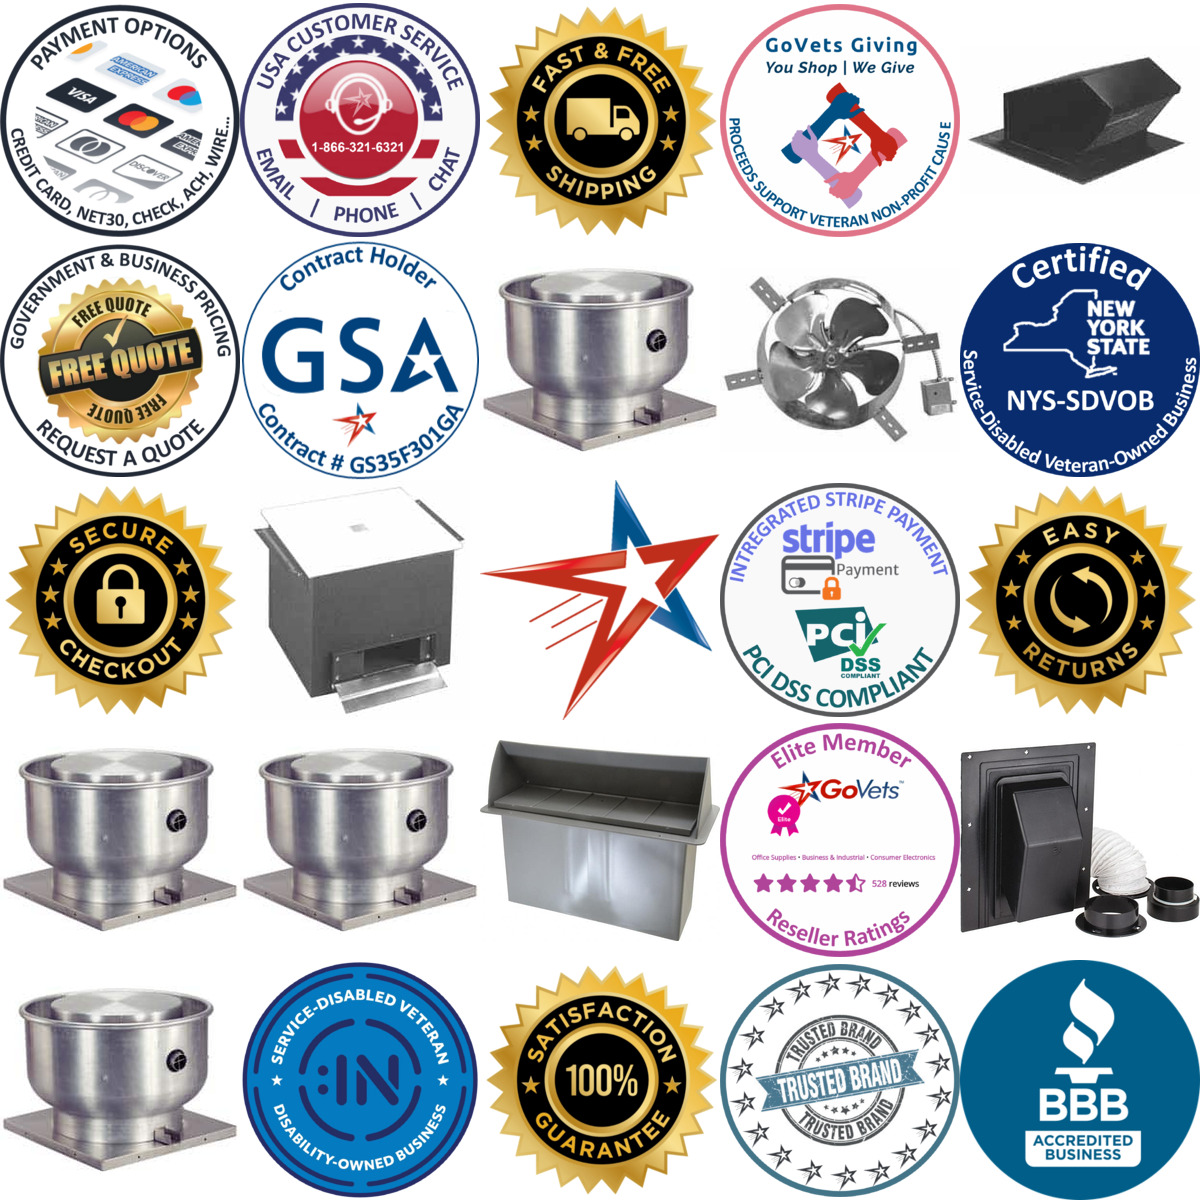 A selection of Exhaust Ventilators products on GoVets